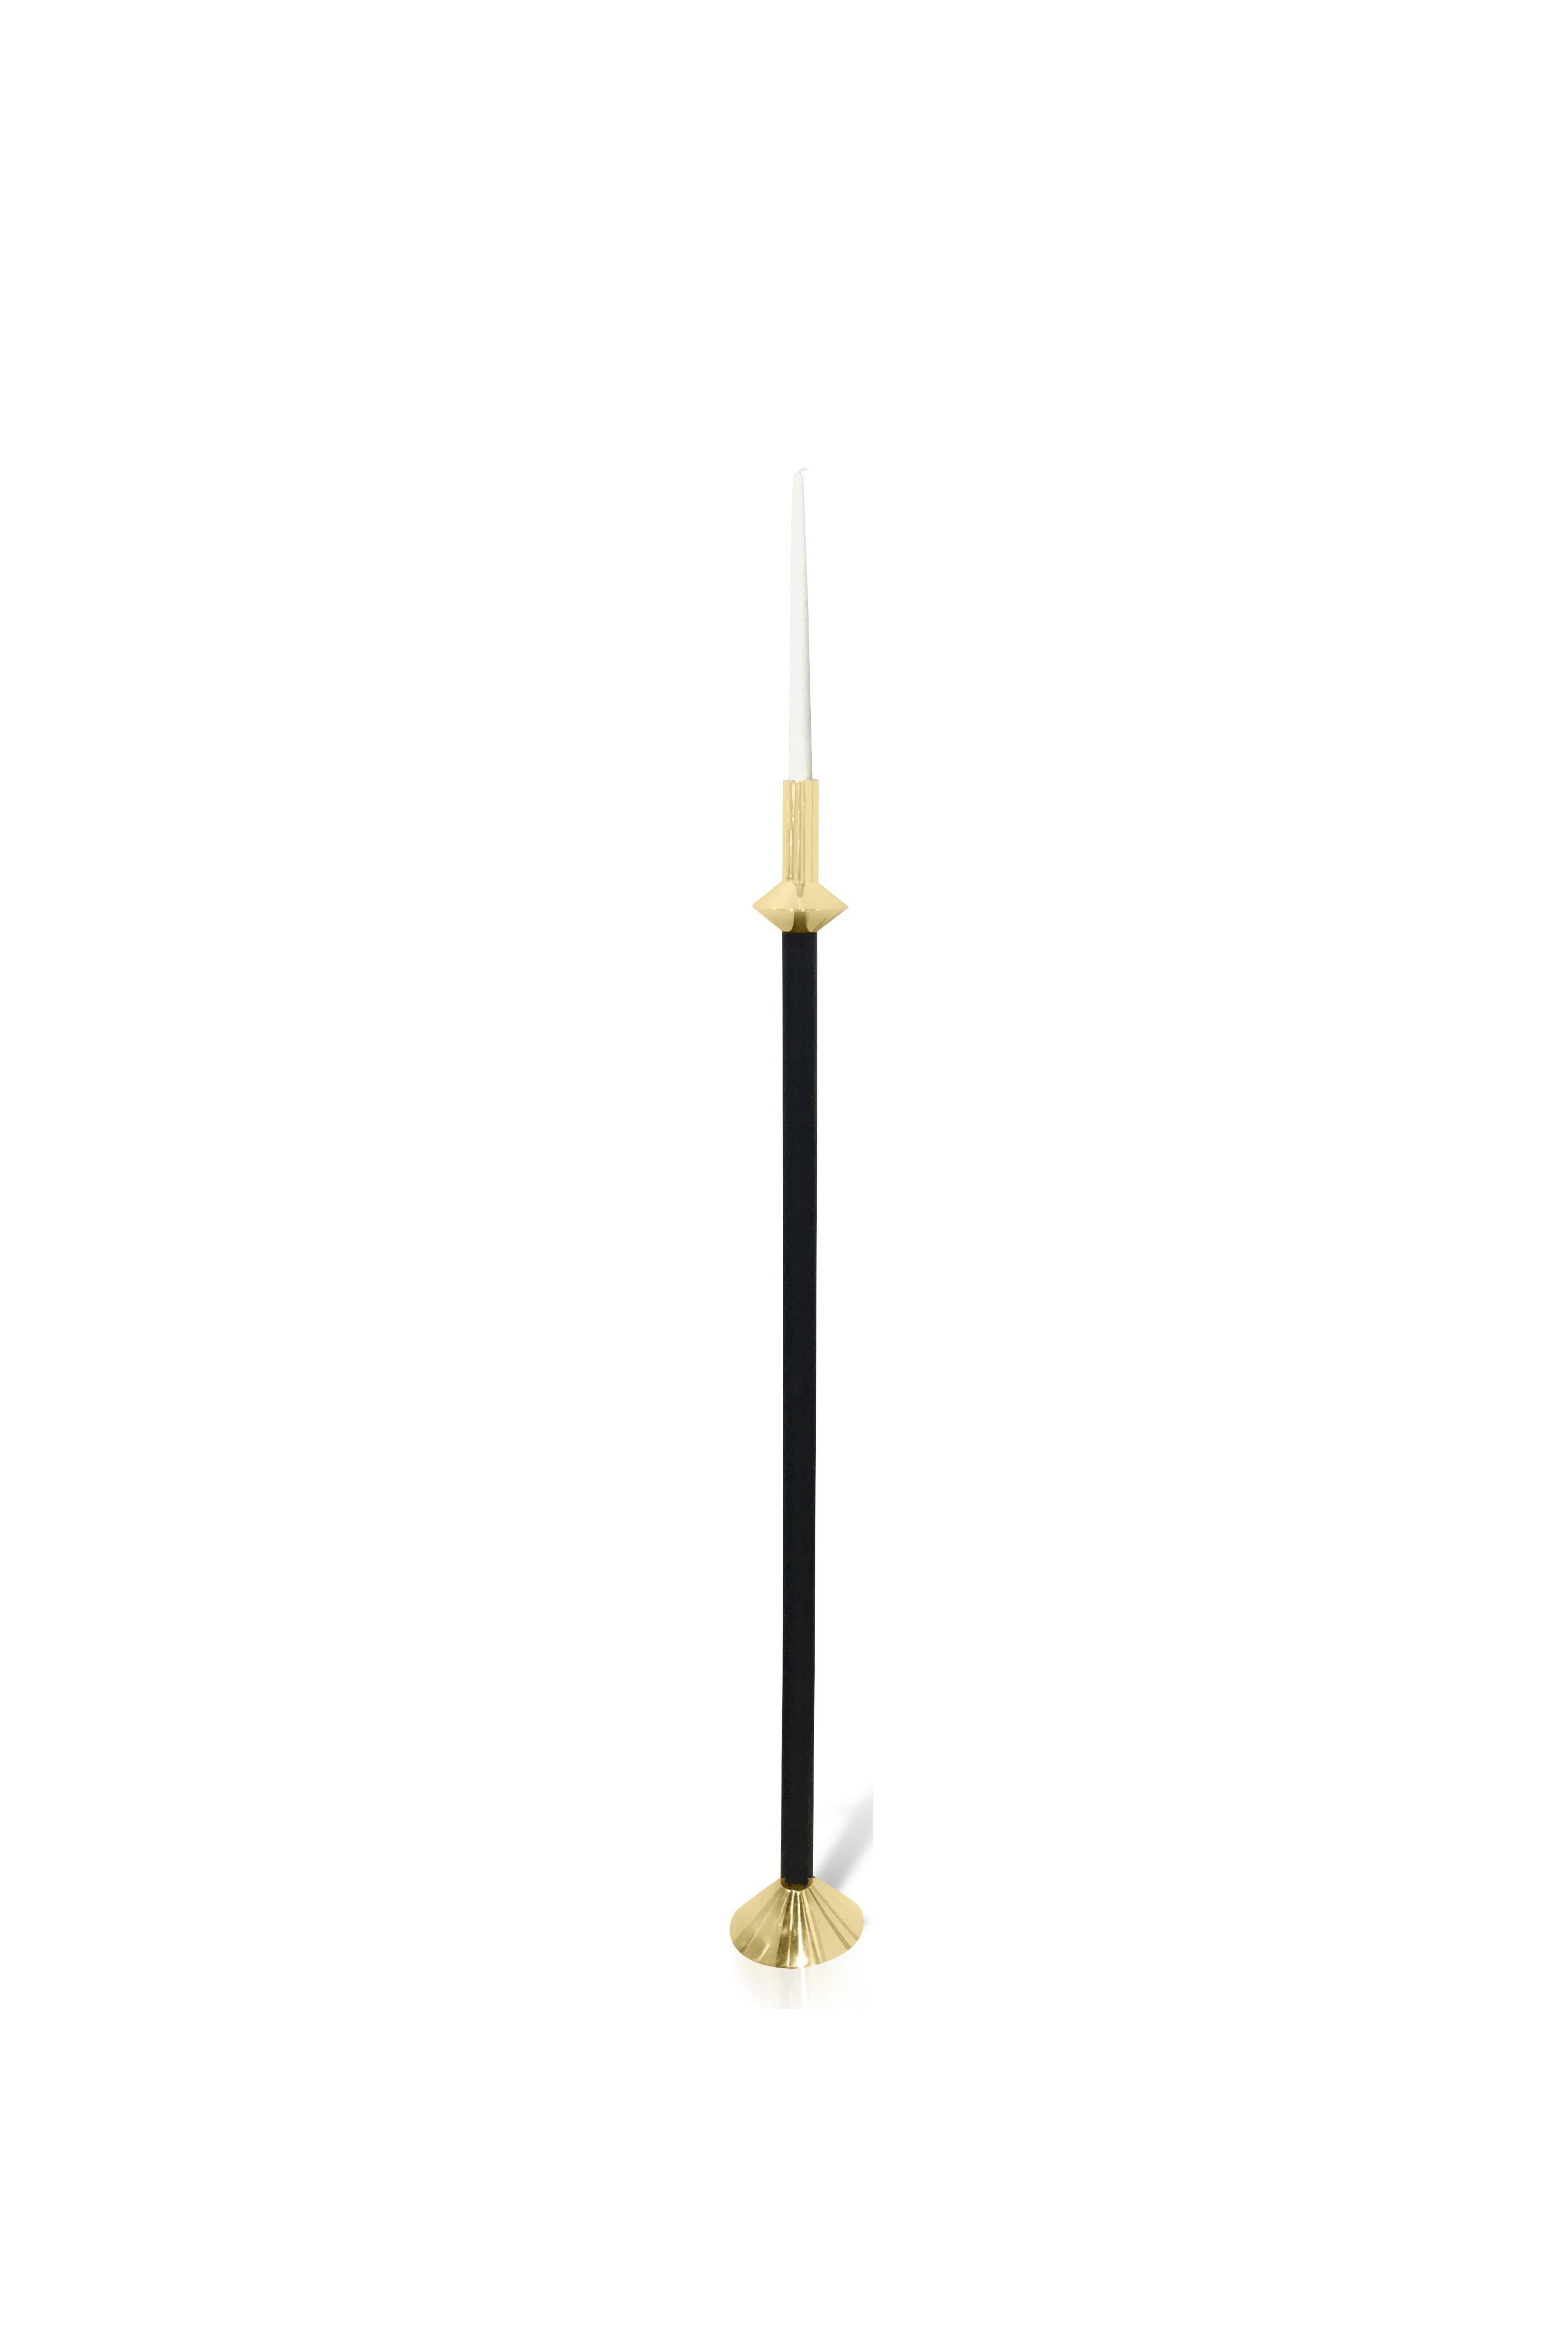 Part of Les Few's Annette collection, these contemporary, Minimalist floor candleholders are made by artisans in Sweden. They come in a polished or brushed finish.